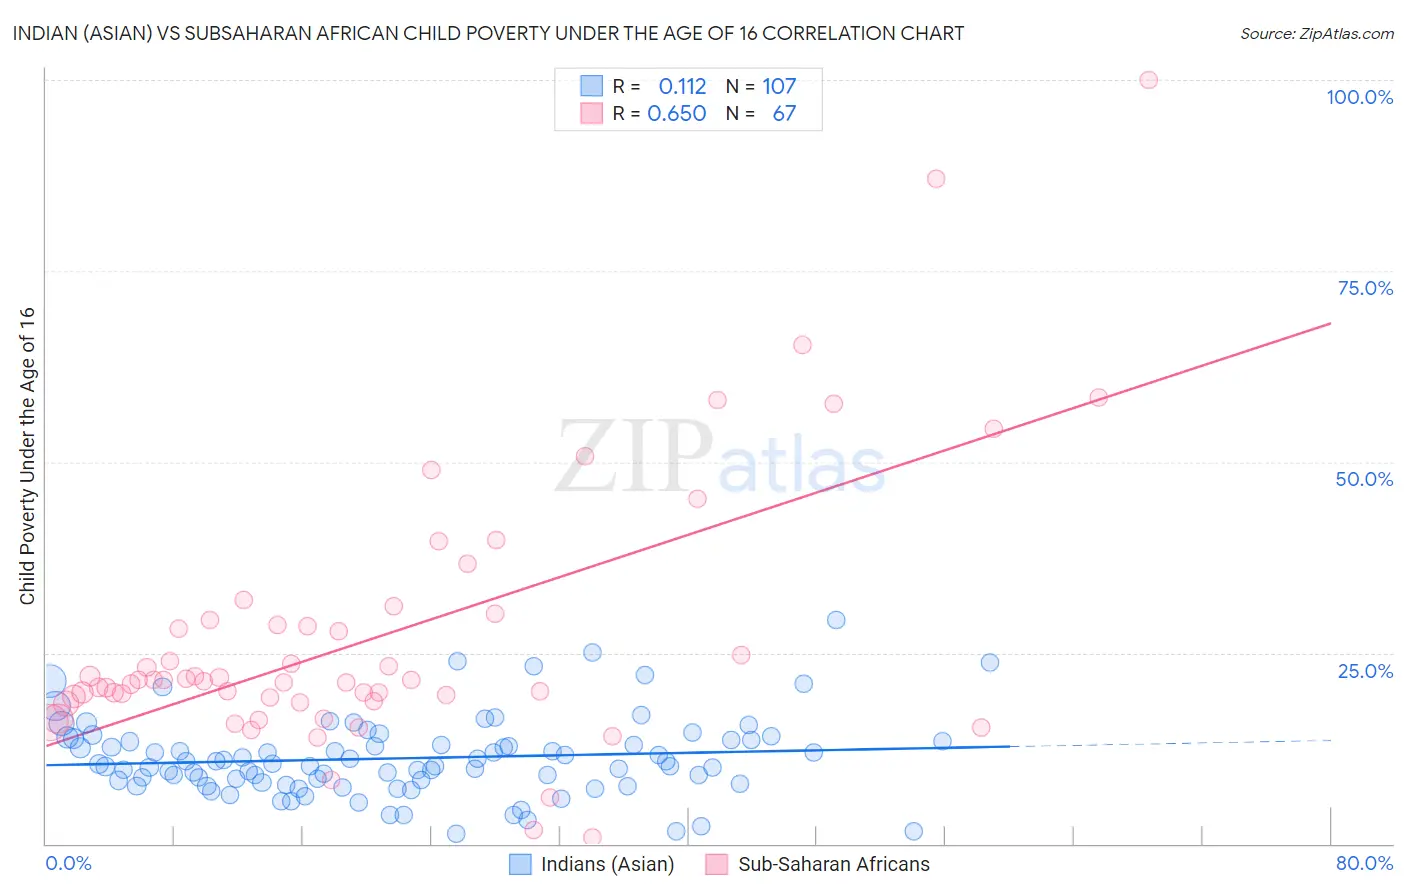 Indian (Asian) vs Subsaharan African Child Poverty Under the Age of 16